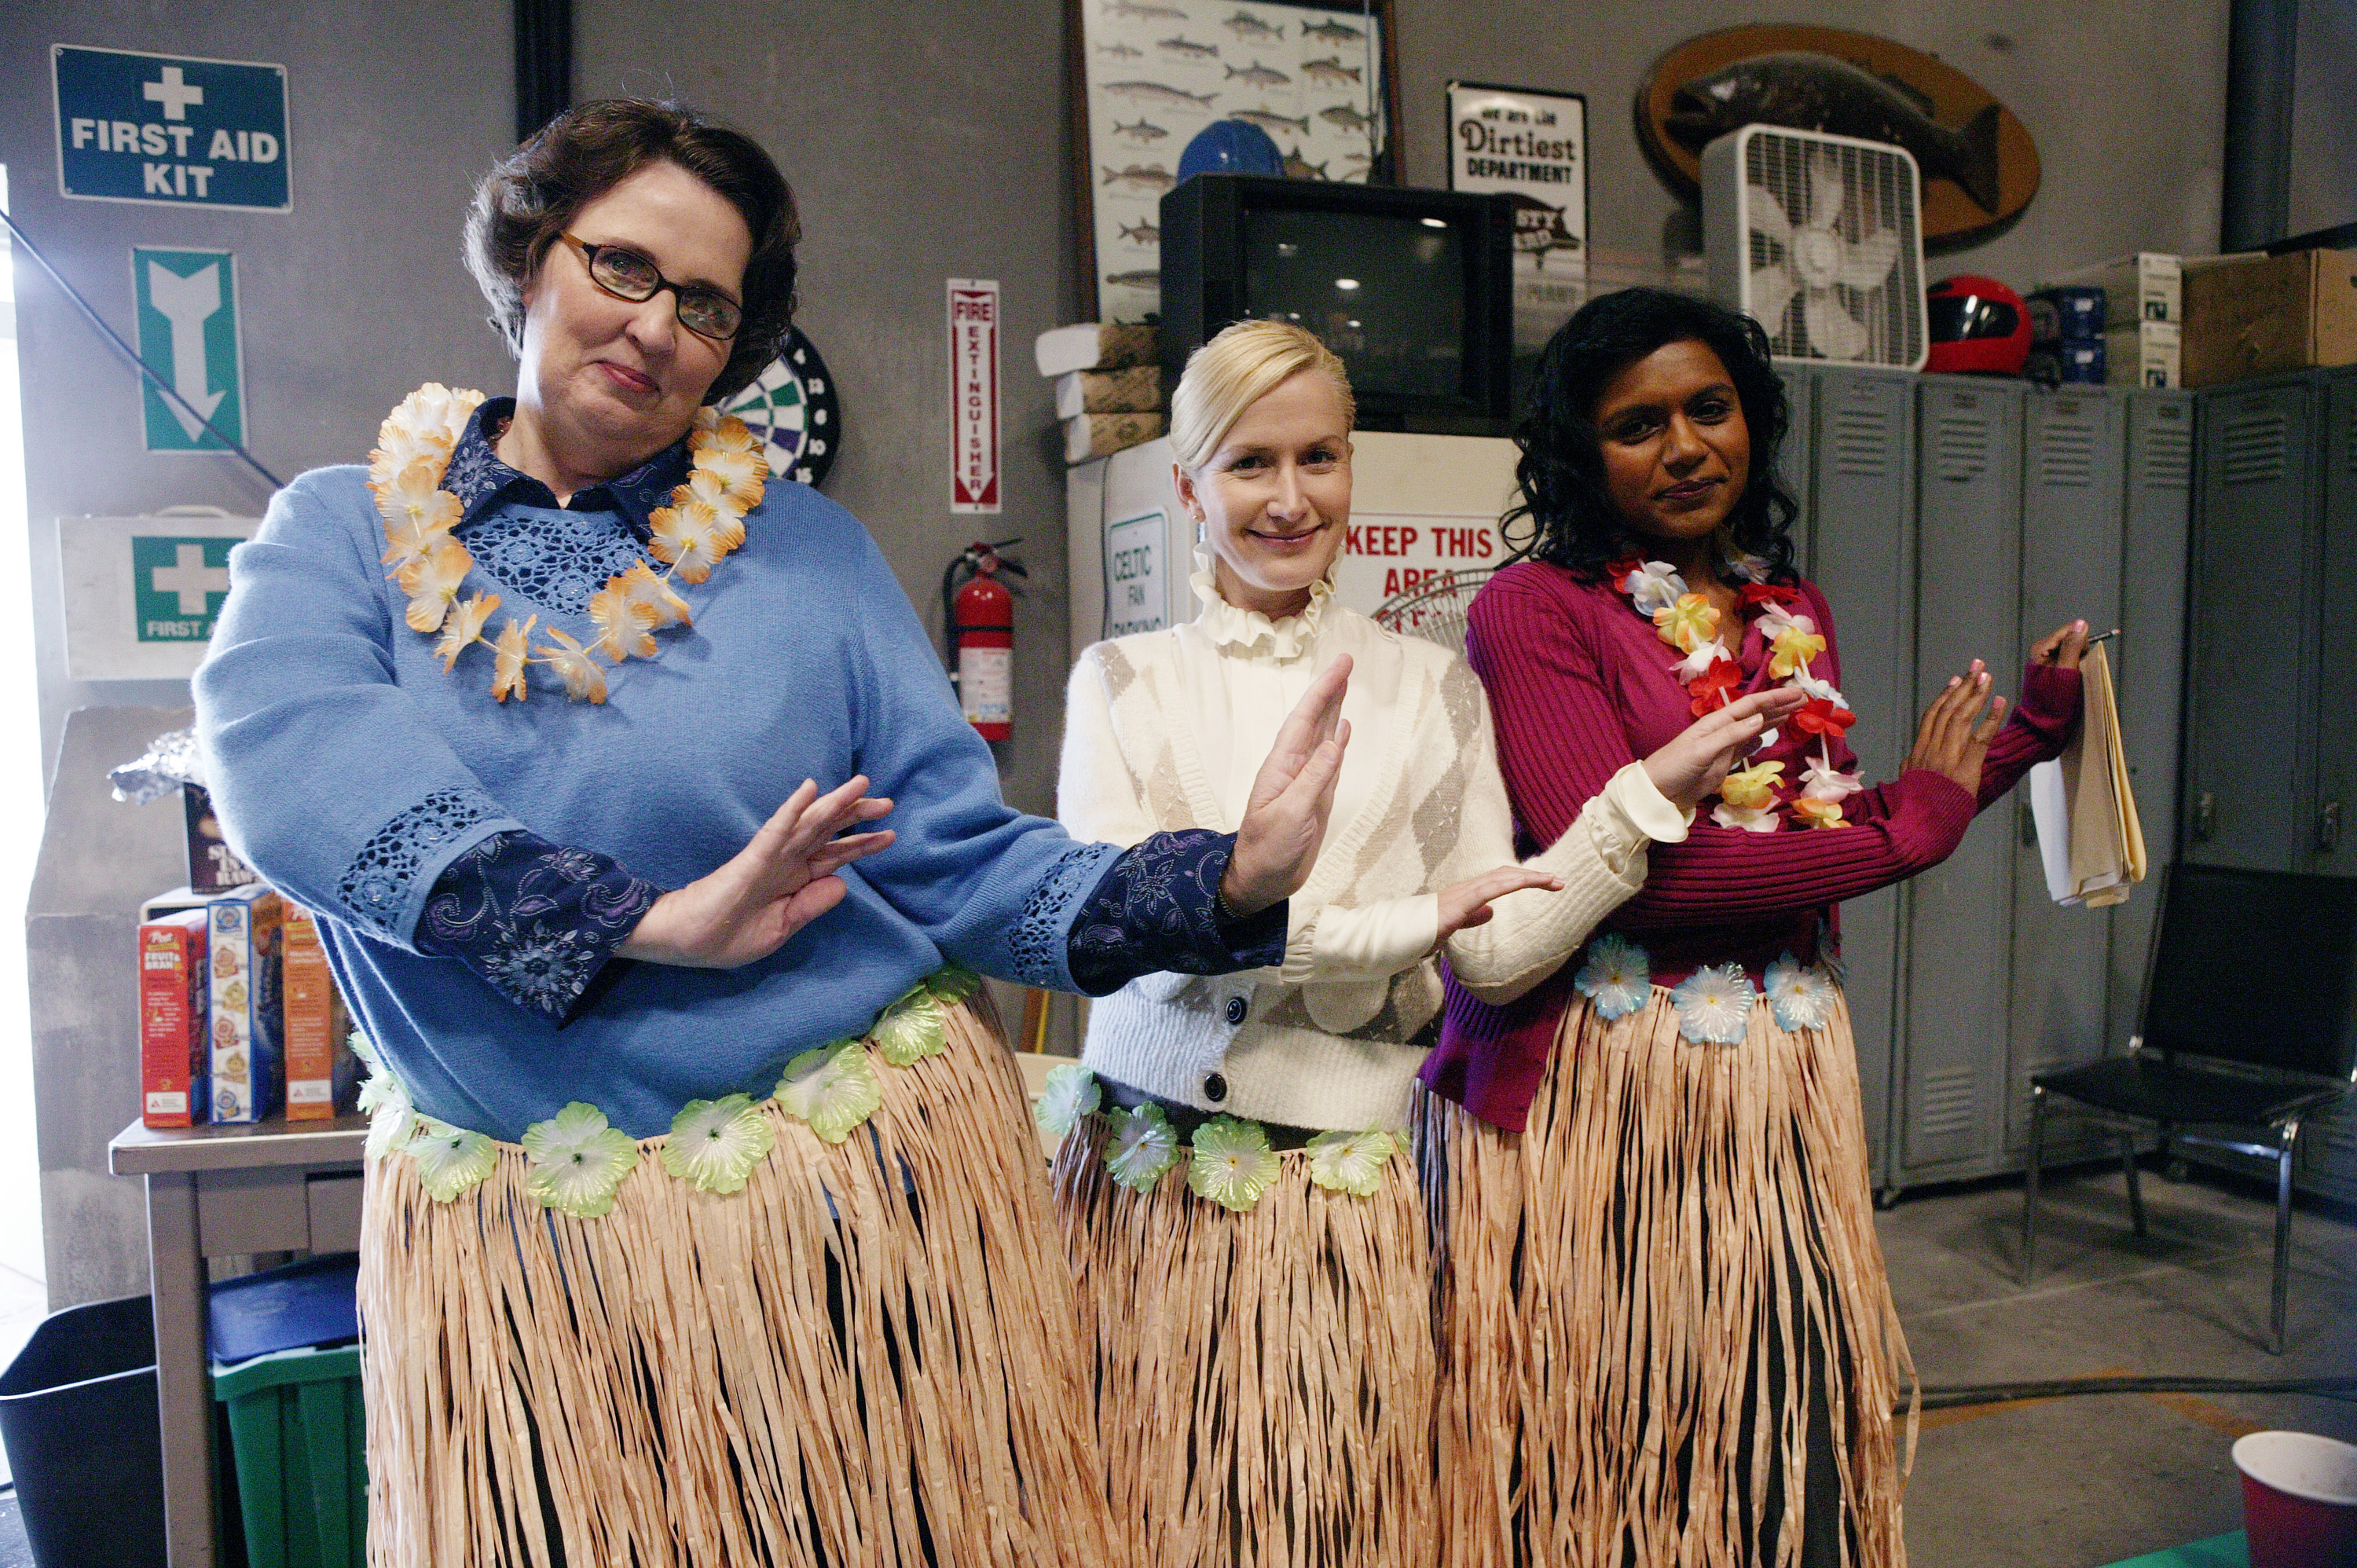 The Office cast members Phyllis Lapin, Angela Kinsey, and Mindy Kaling as Phyllis Smith, Angela Martin, and Kelly Kapoor wearing hula skirts while filming an episode